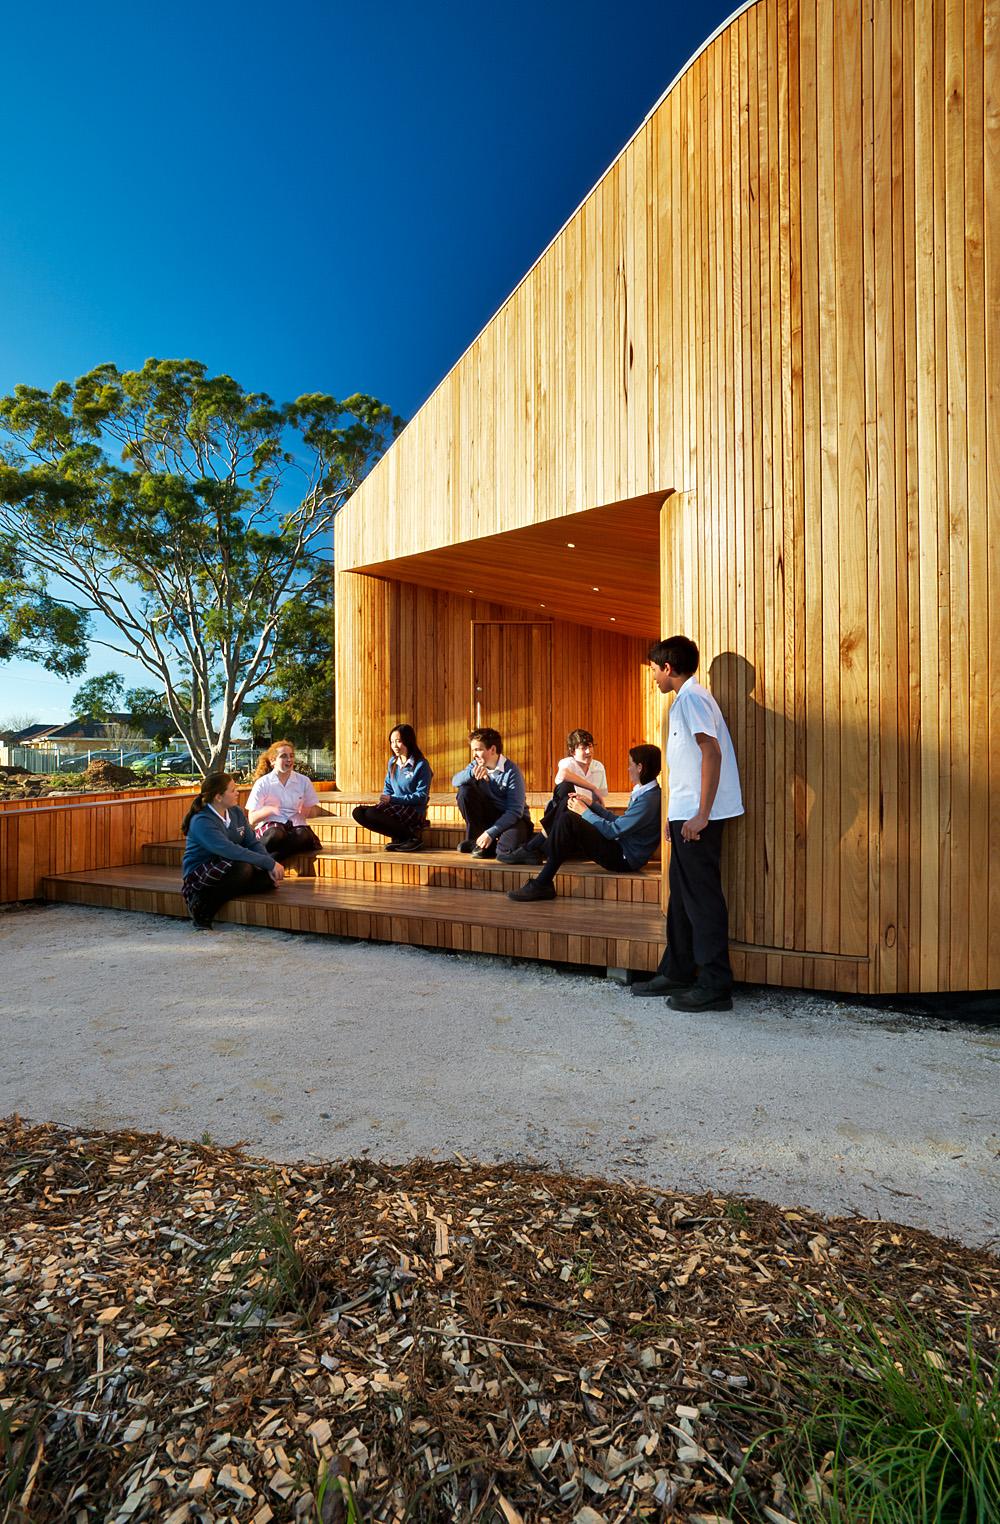 A Sustainable Campus Community Environment: The building is a key part of the school s desire to create a sustainable campus and change the behaviours of students, staff and the wider community in